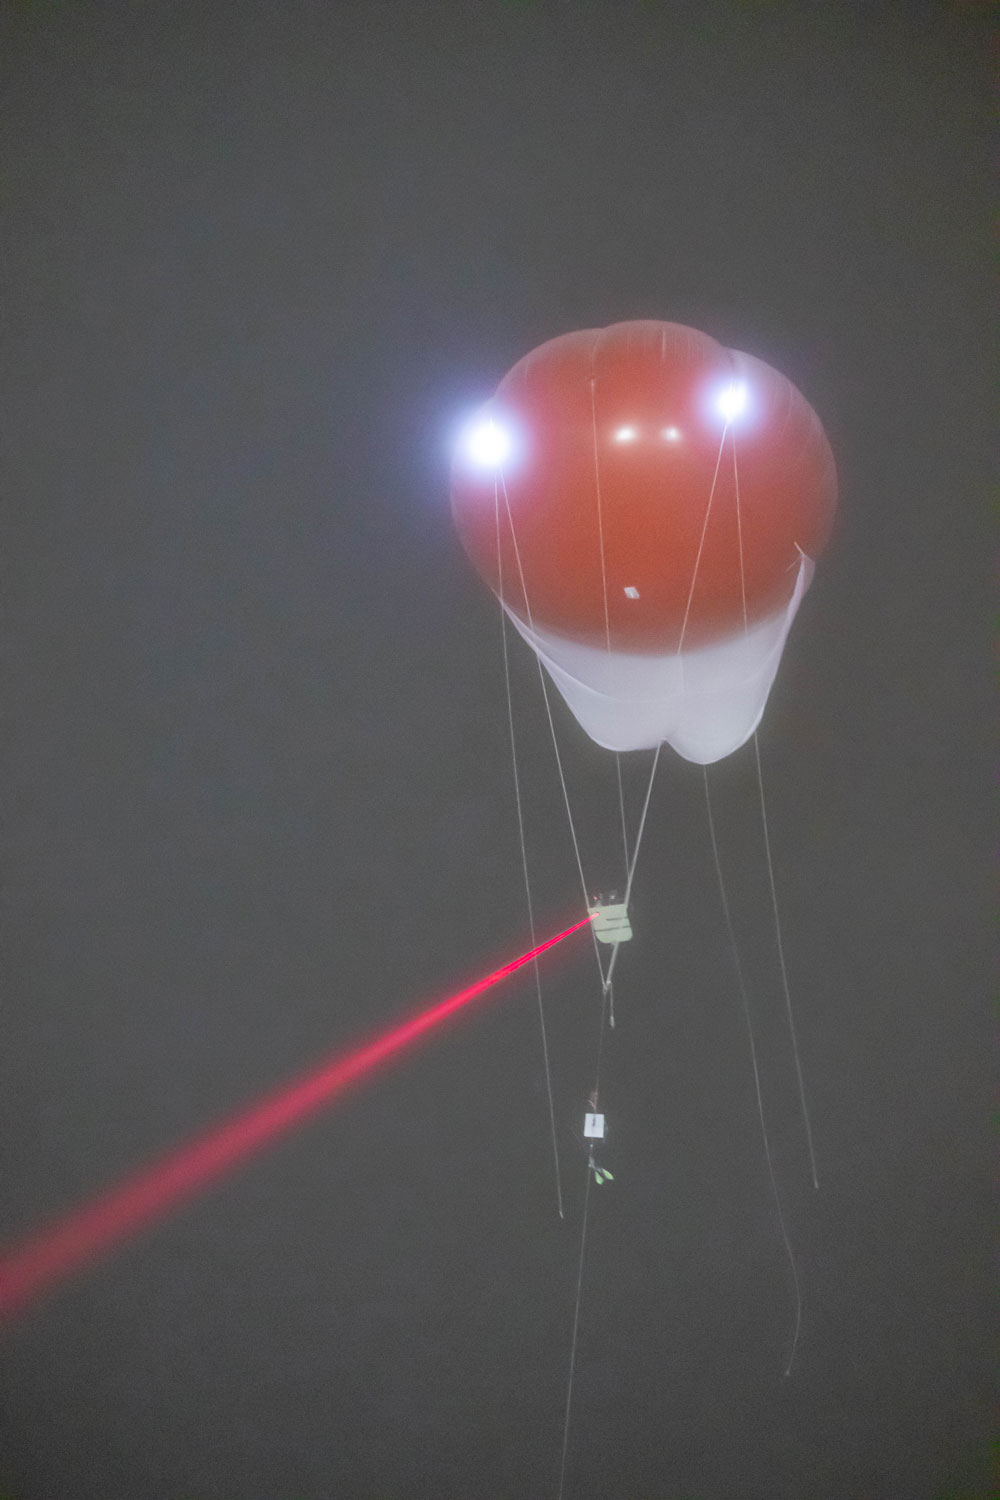 Tethered balloon system flies at Oliktok Point, Alaska, in ice fog with red laser shining from instrument platform